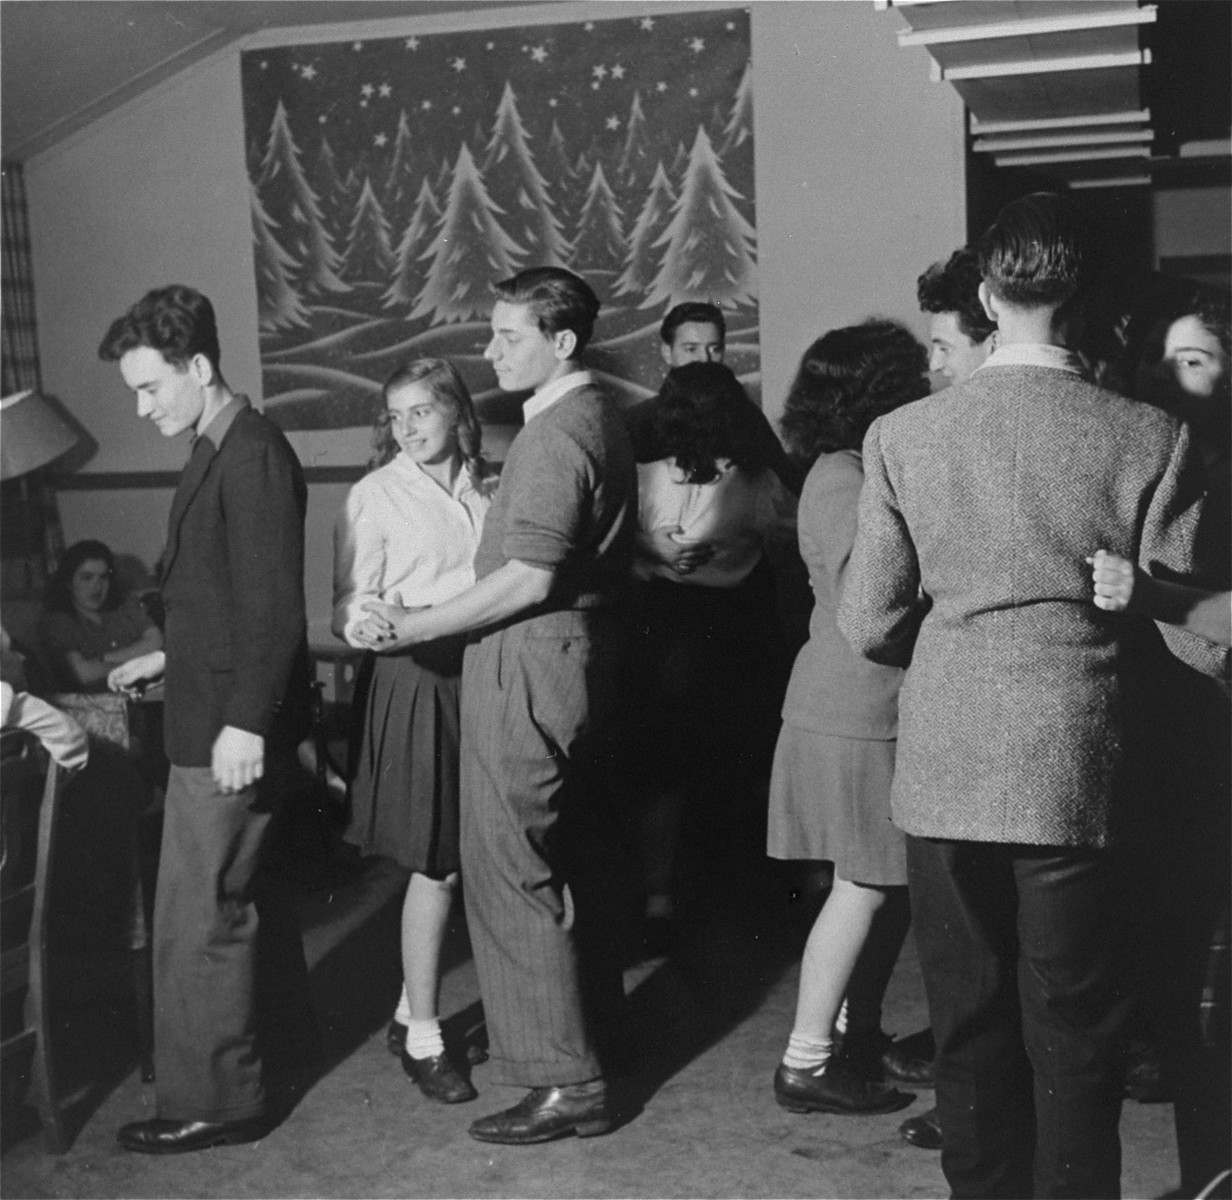 A youth group dance at the Fort Ontario Refugee Center.

Among those pictured left to right are David Hendel, Dorit Reisner, Koki Levi (from Yugoslavia), Adam Munz and [Ivo Lederer].